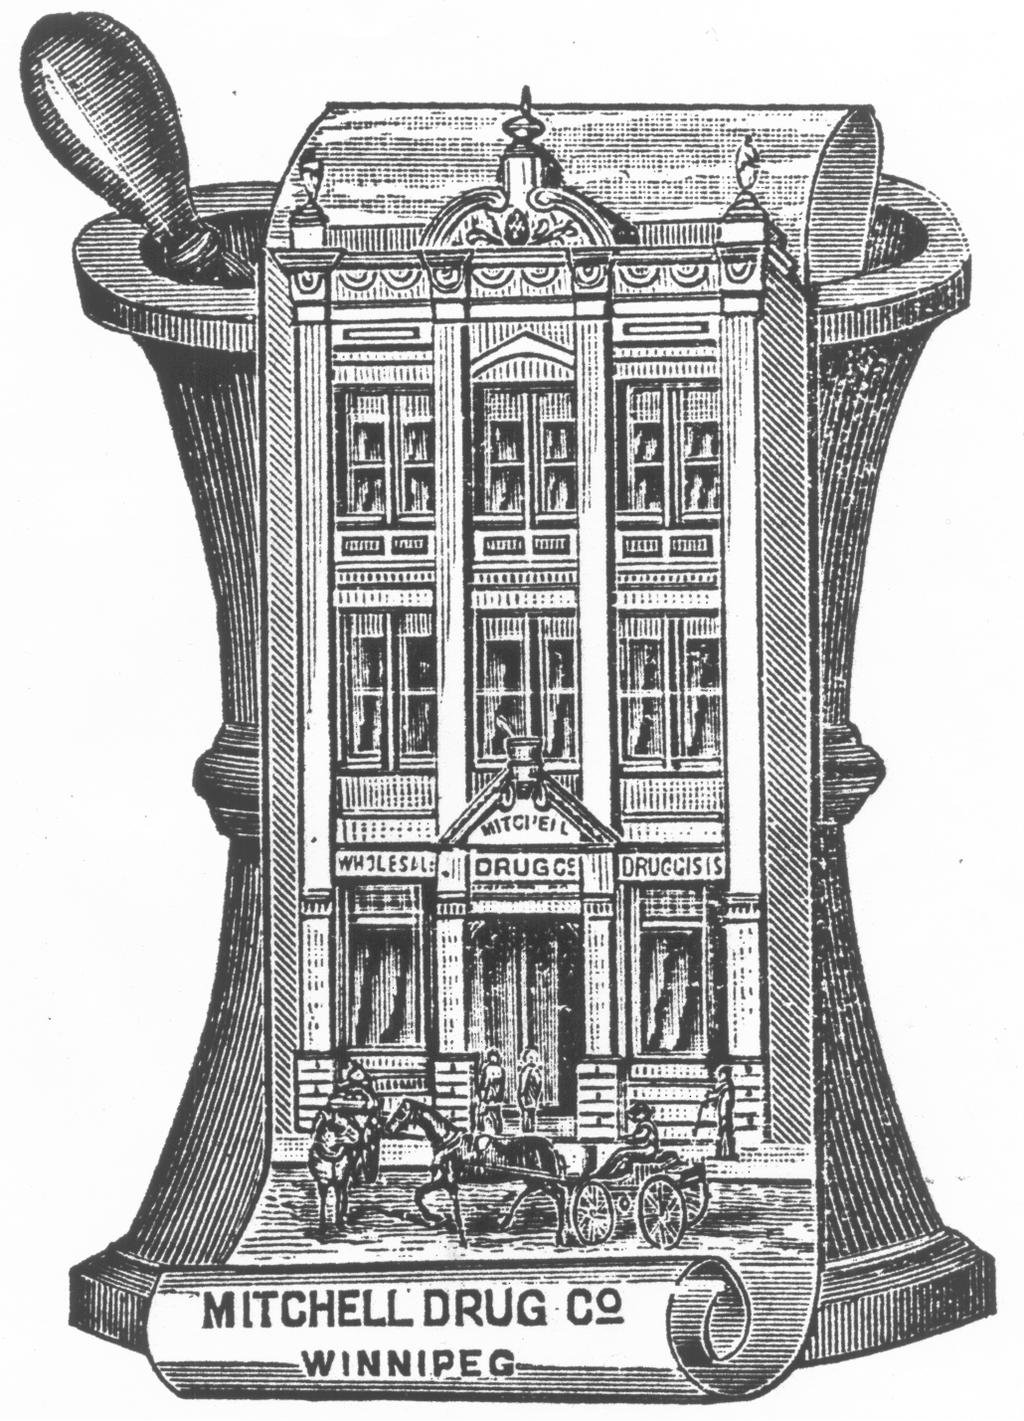 173 McDERMOT AVENUE GRANGE BUILDING Plate 1 Drawing of the Mitchell Drug Company